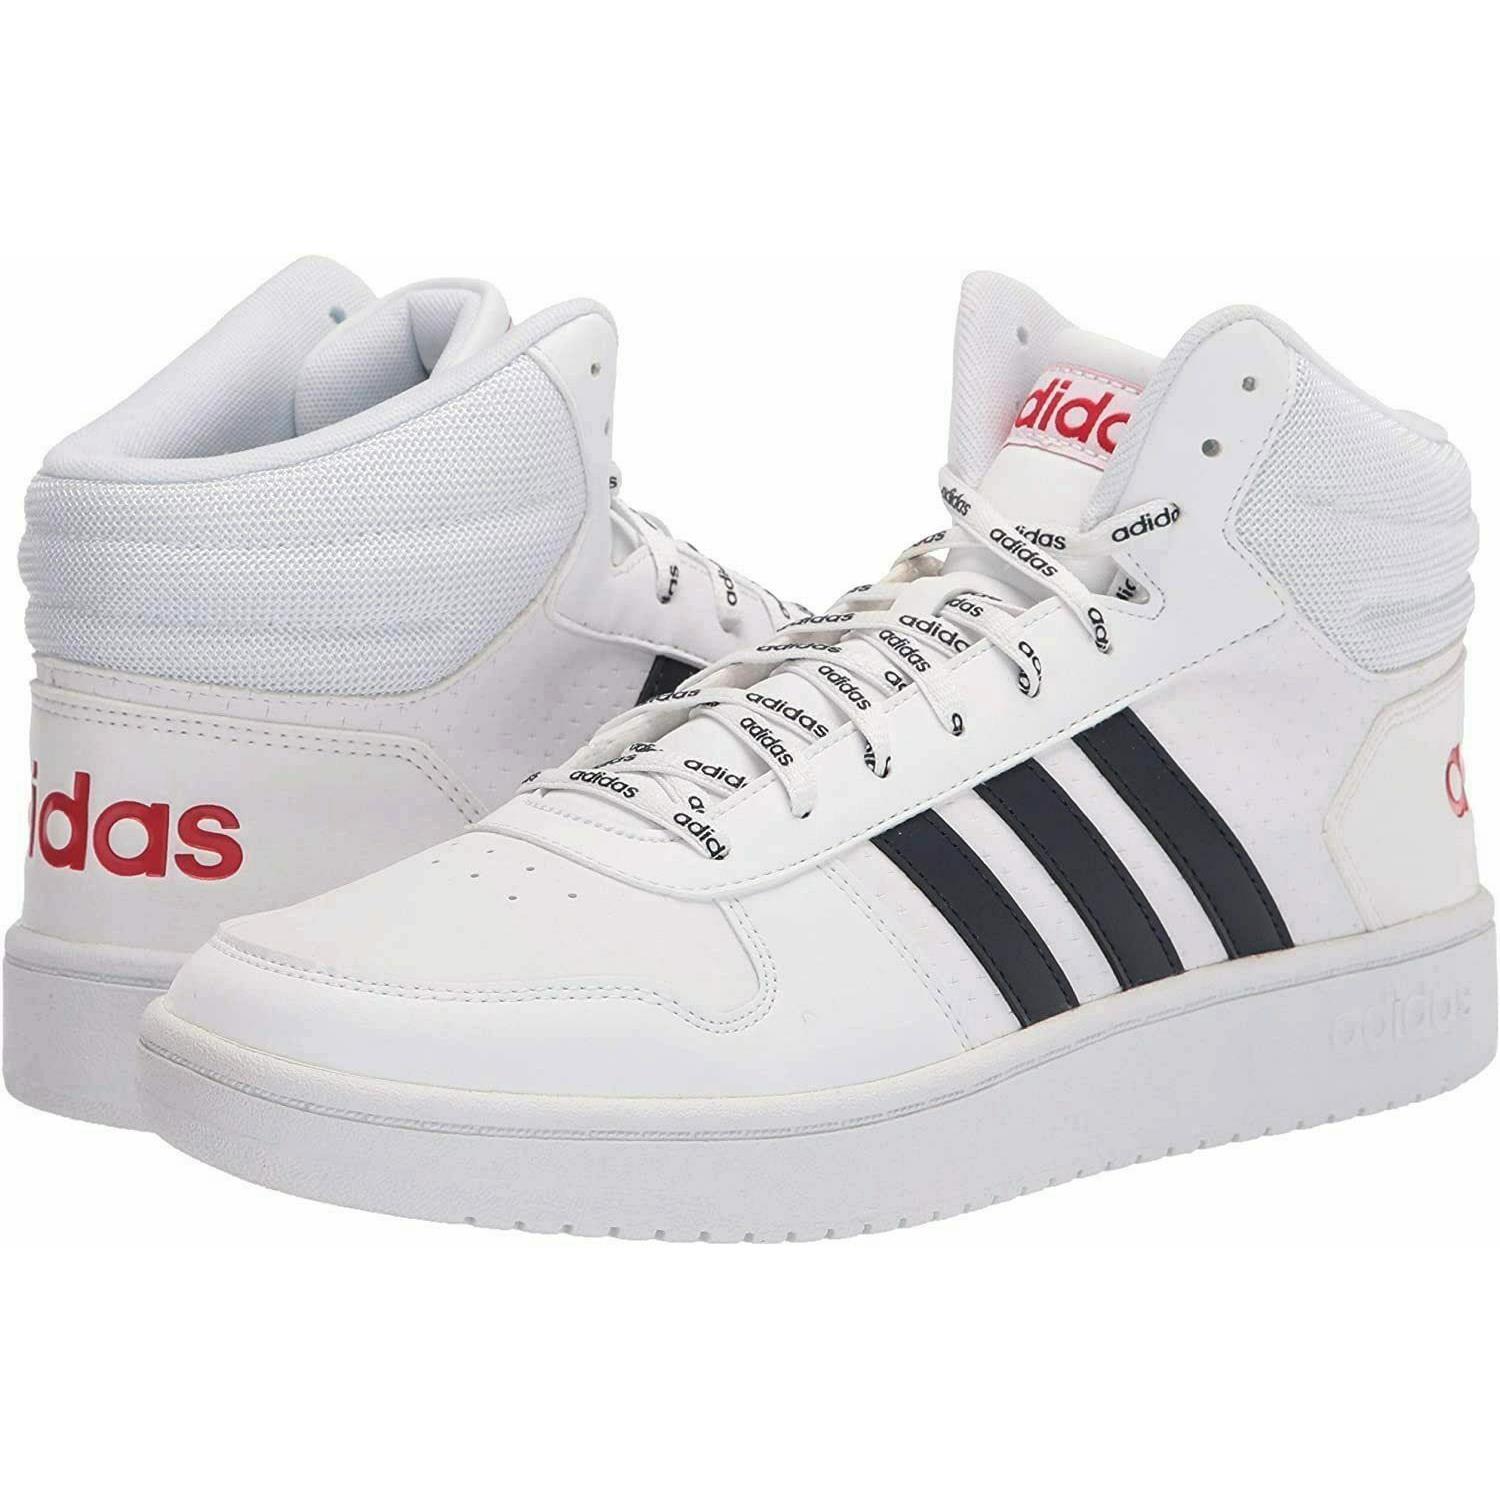 Adidas Hoops 2.0 Mid 11.5 White Legend Ink Basketball Casual Shoe Nos FW4478